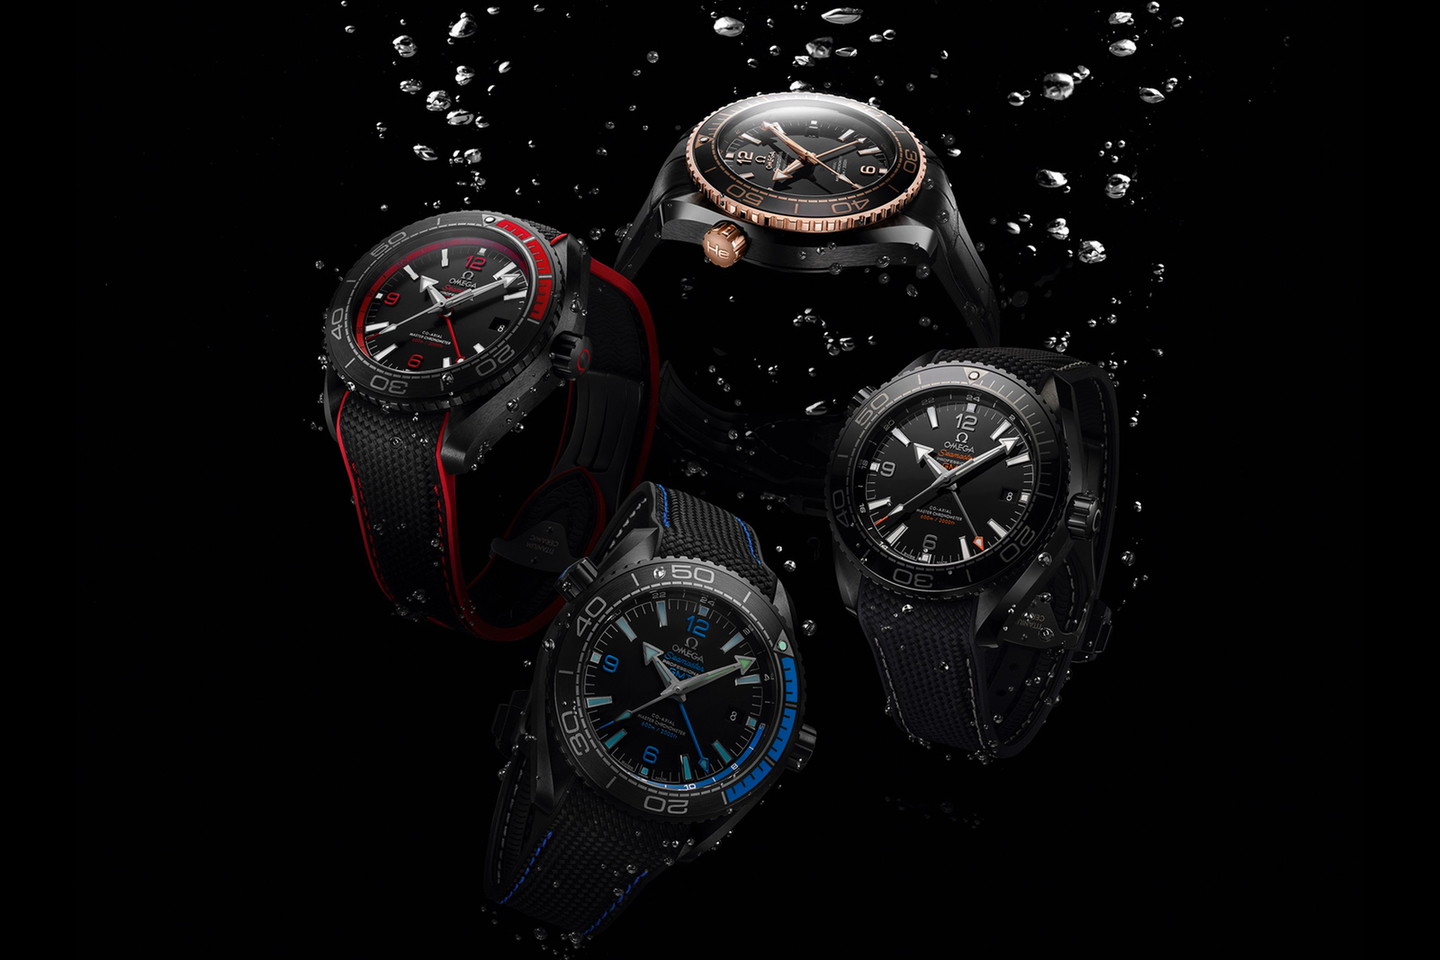 Introducing the Omega Planet Ocean Deep Black collection